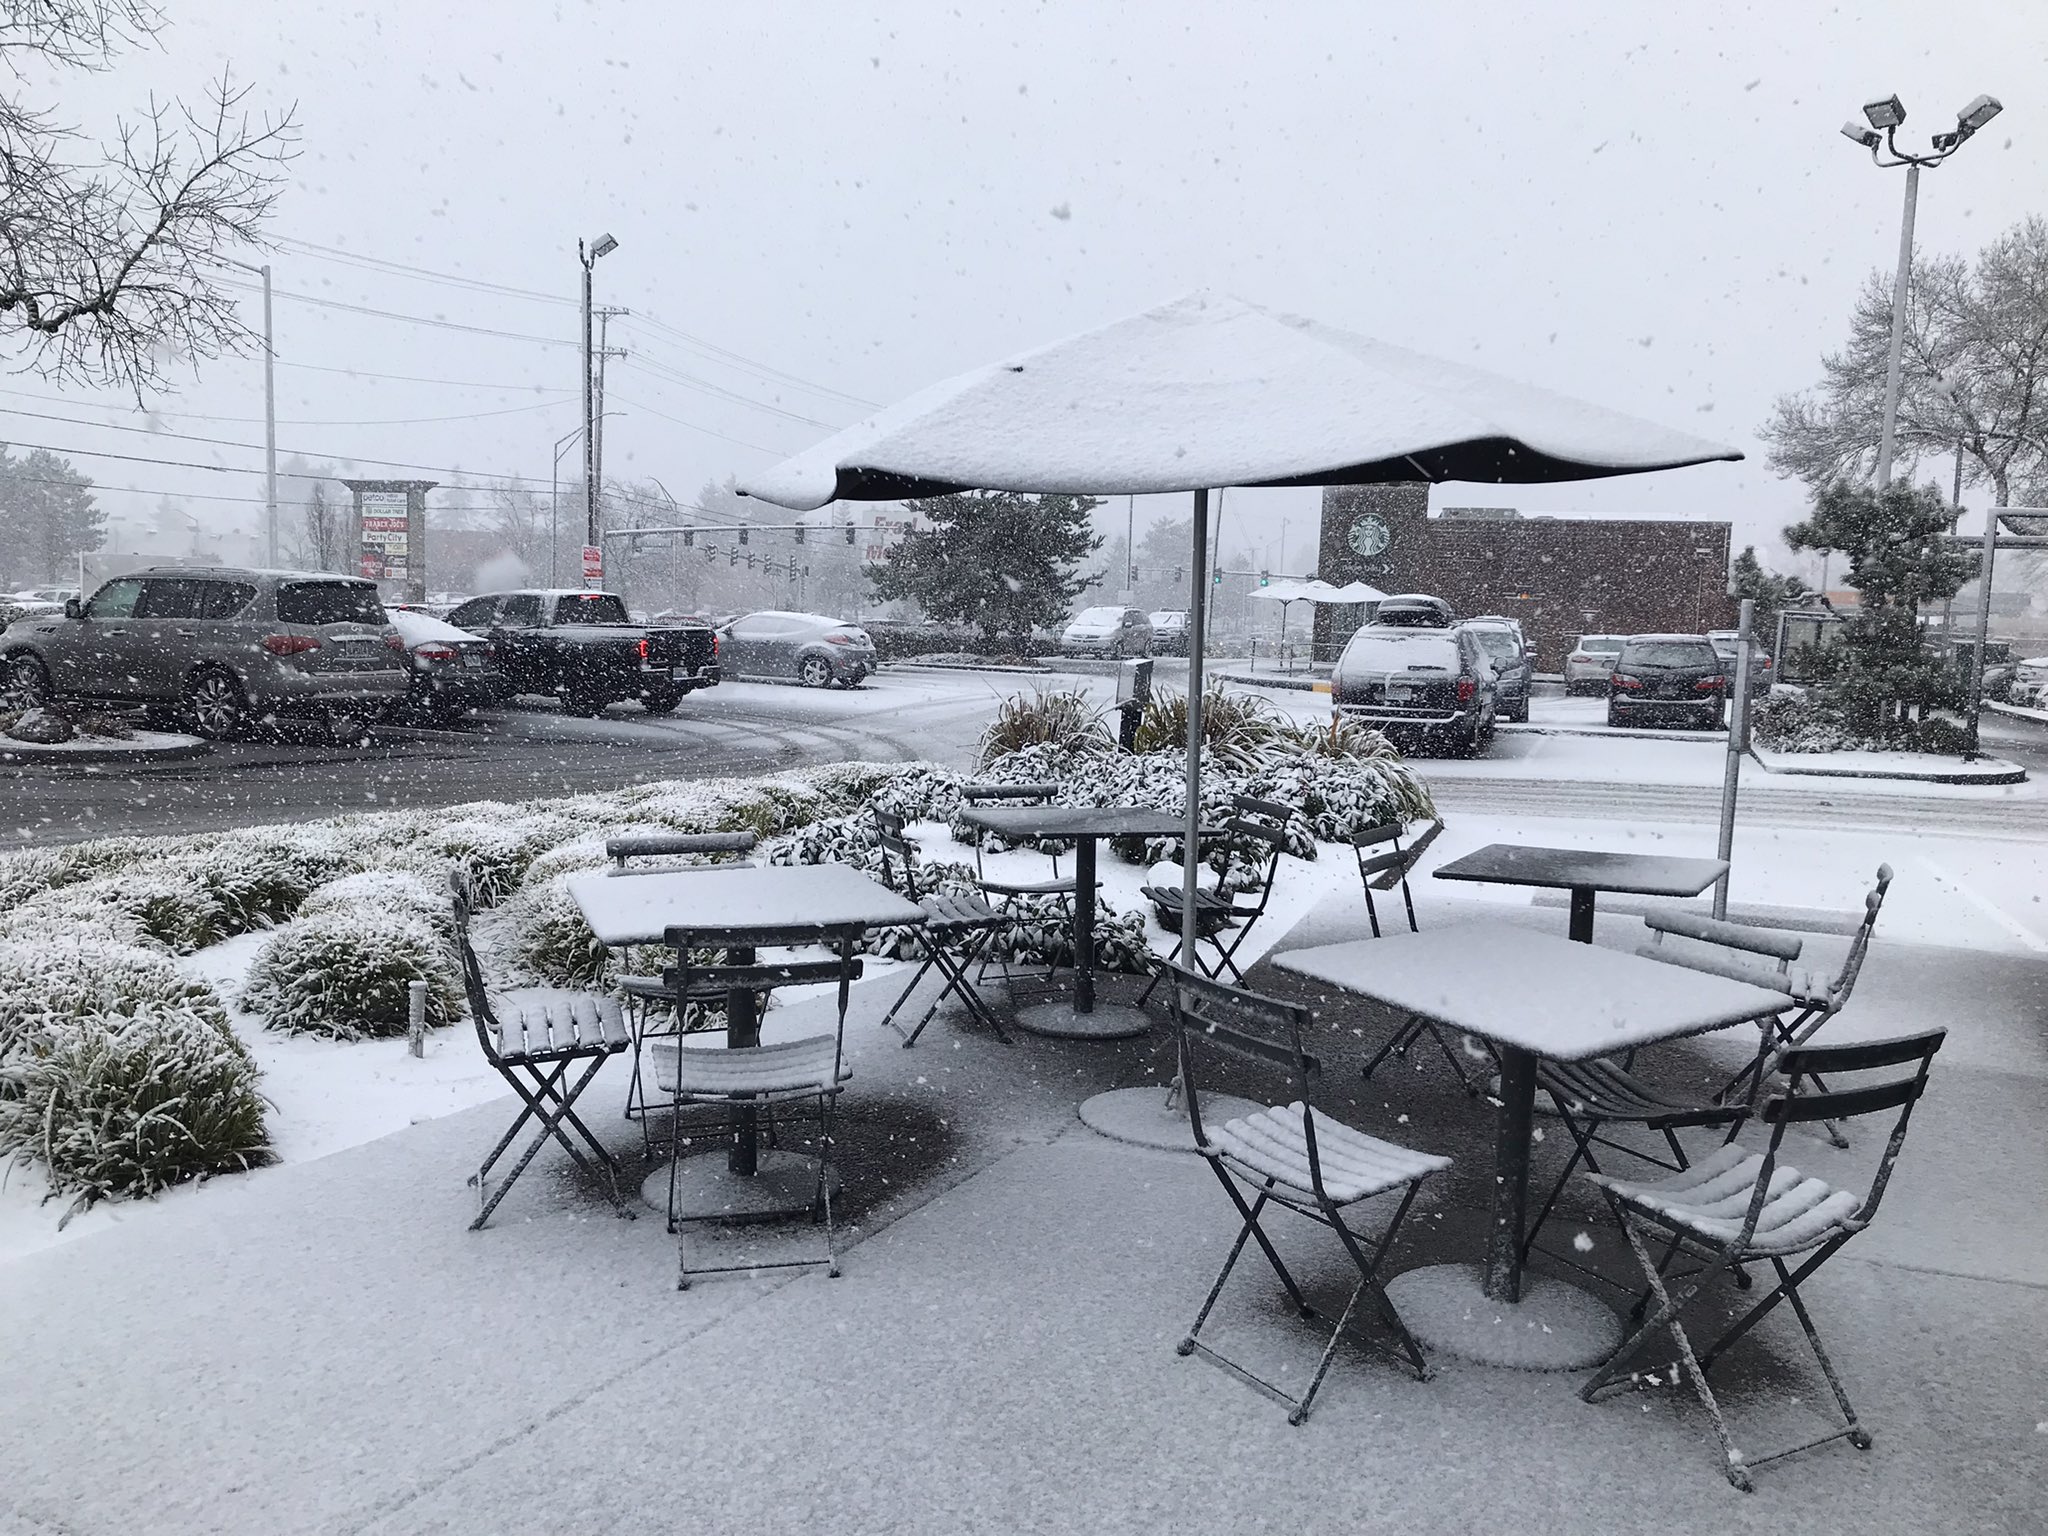 Parking lots and roads in east Vancouver are starting to see snow stick on Wednesday morning. Other parts of Clark County got snow overnight but Vancouver saw rain until after sunup.